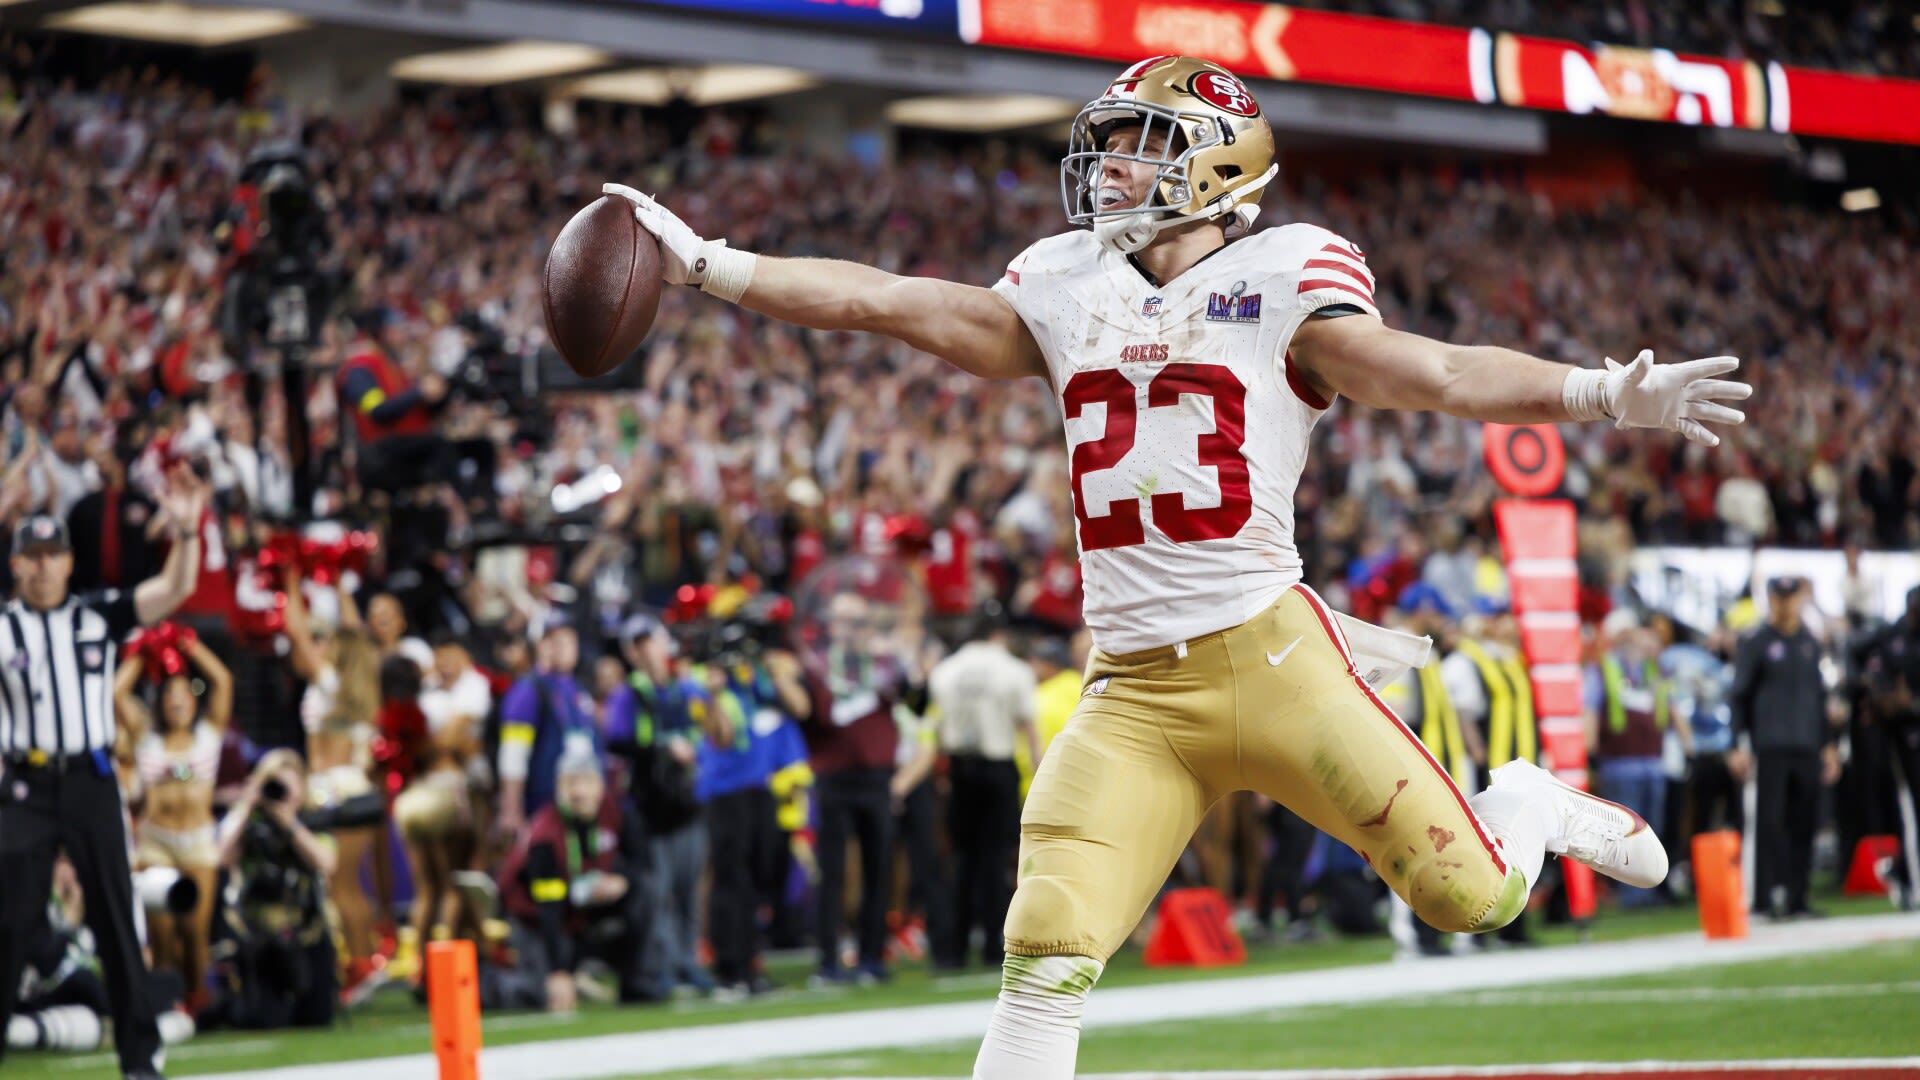 Report: Christian McCaffrey will be at 49ers minicamp